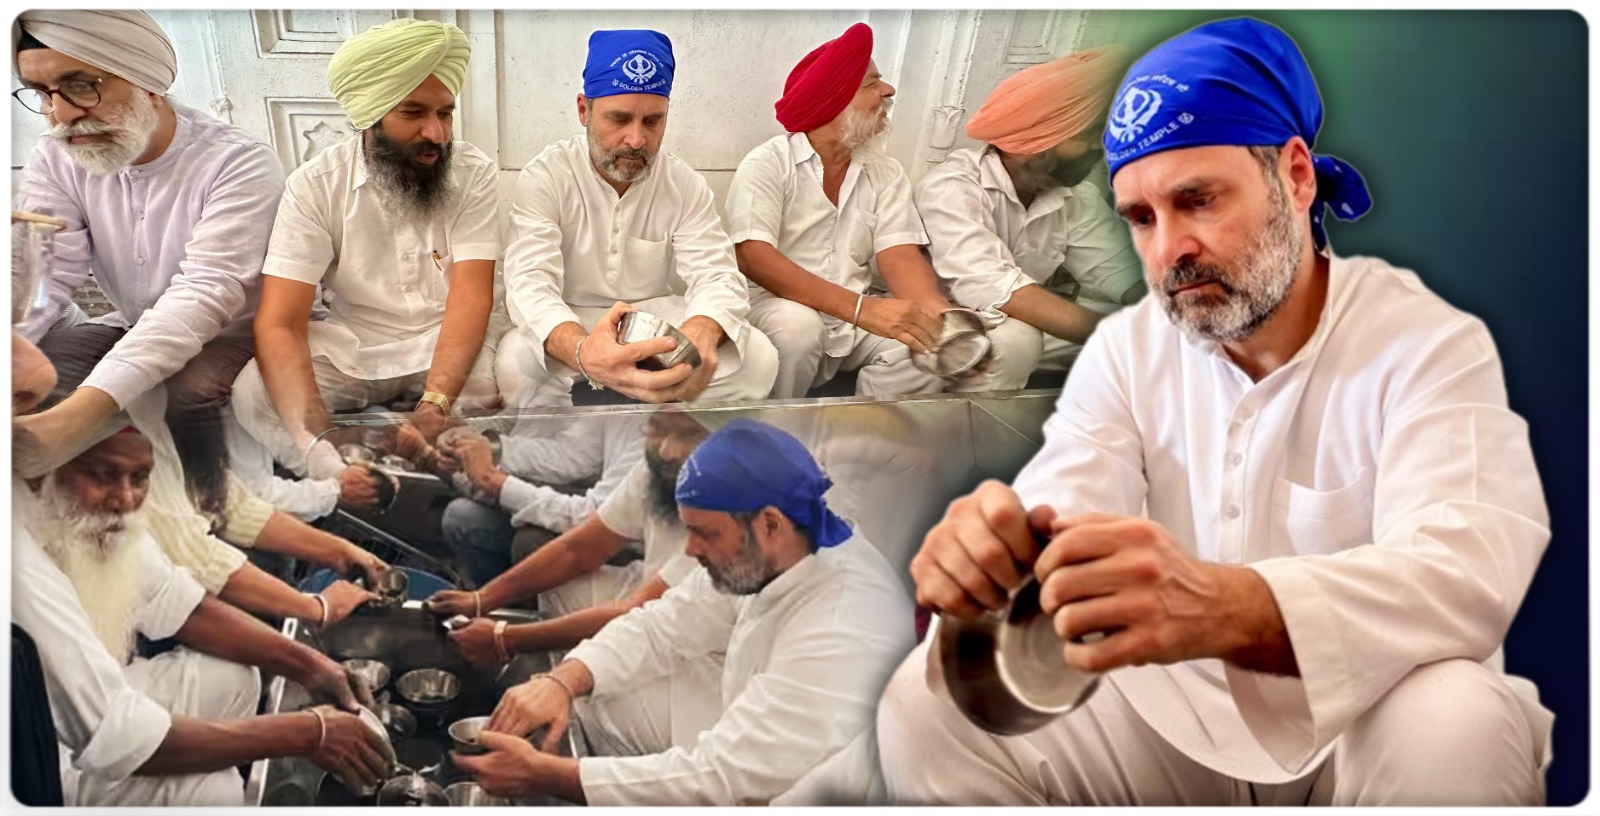 congress-leader-rahul-gandhi-washes-dishes-at-golden-temple-in-punjab-